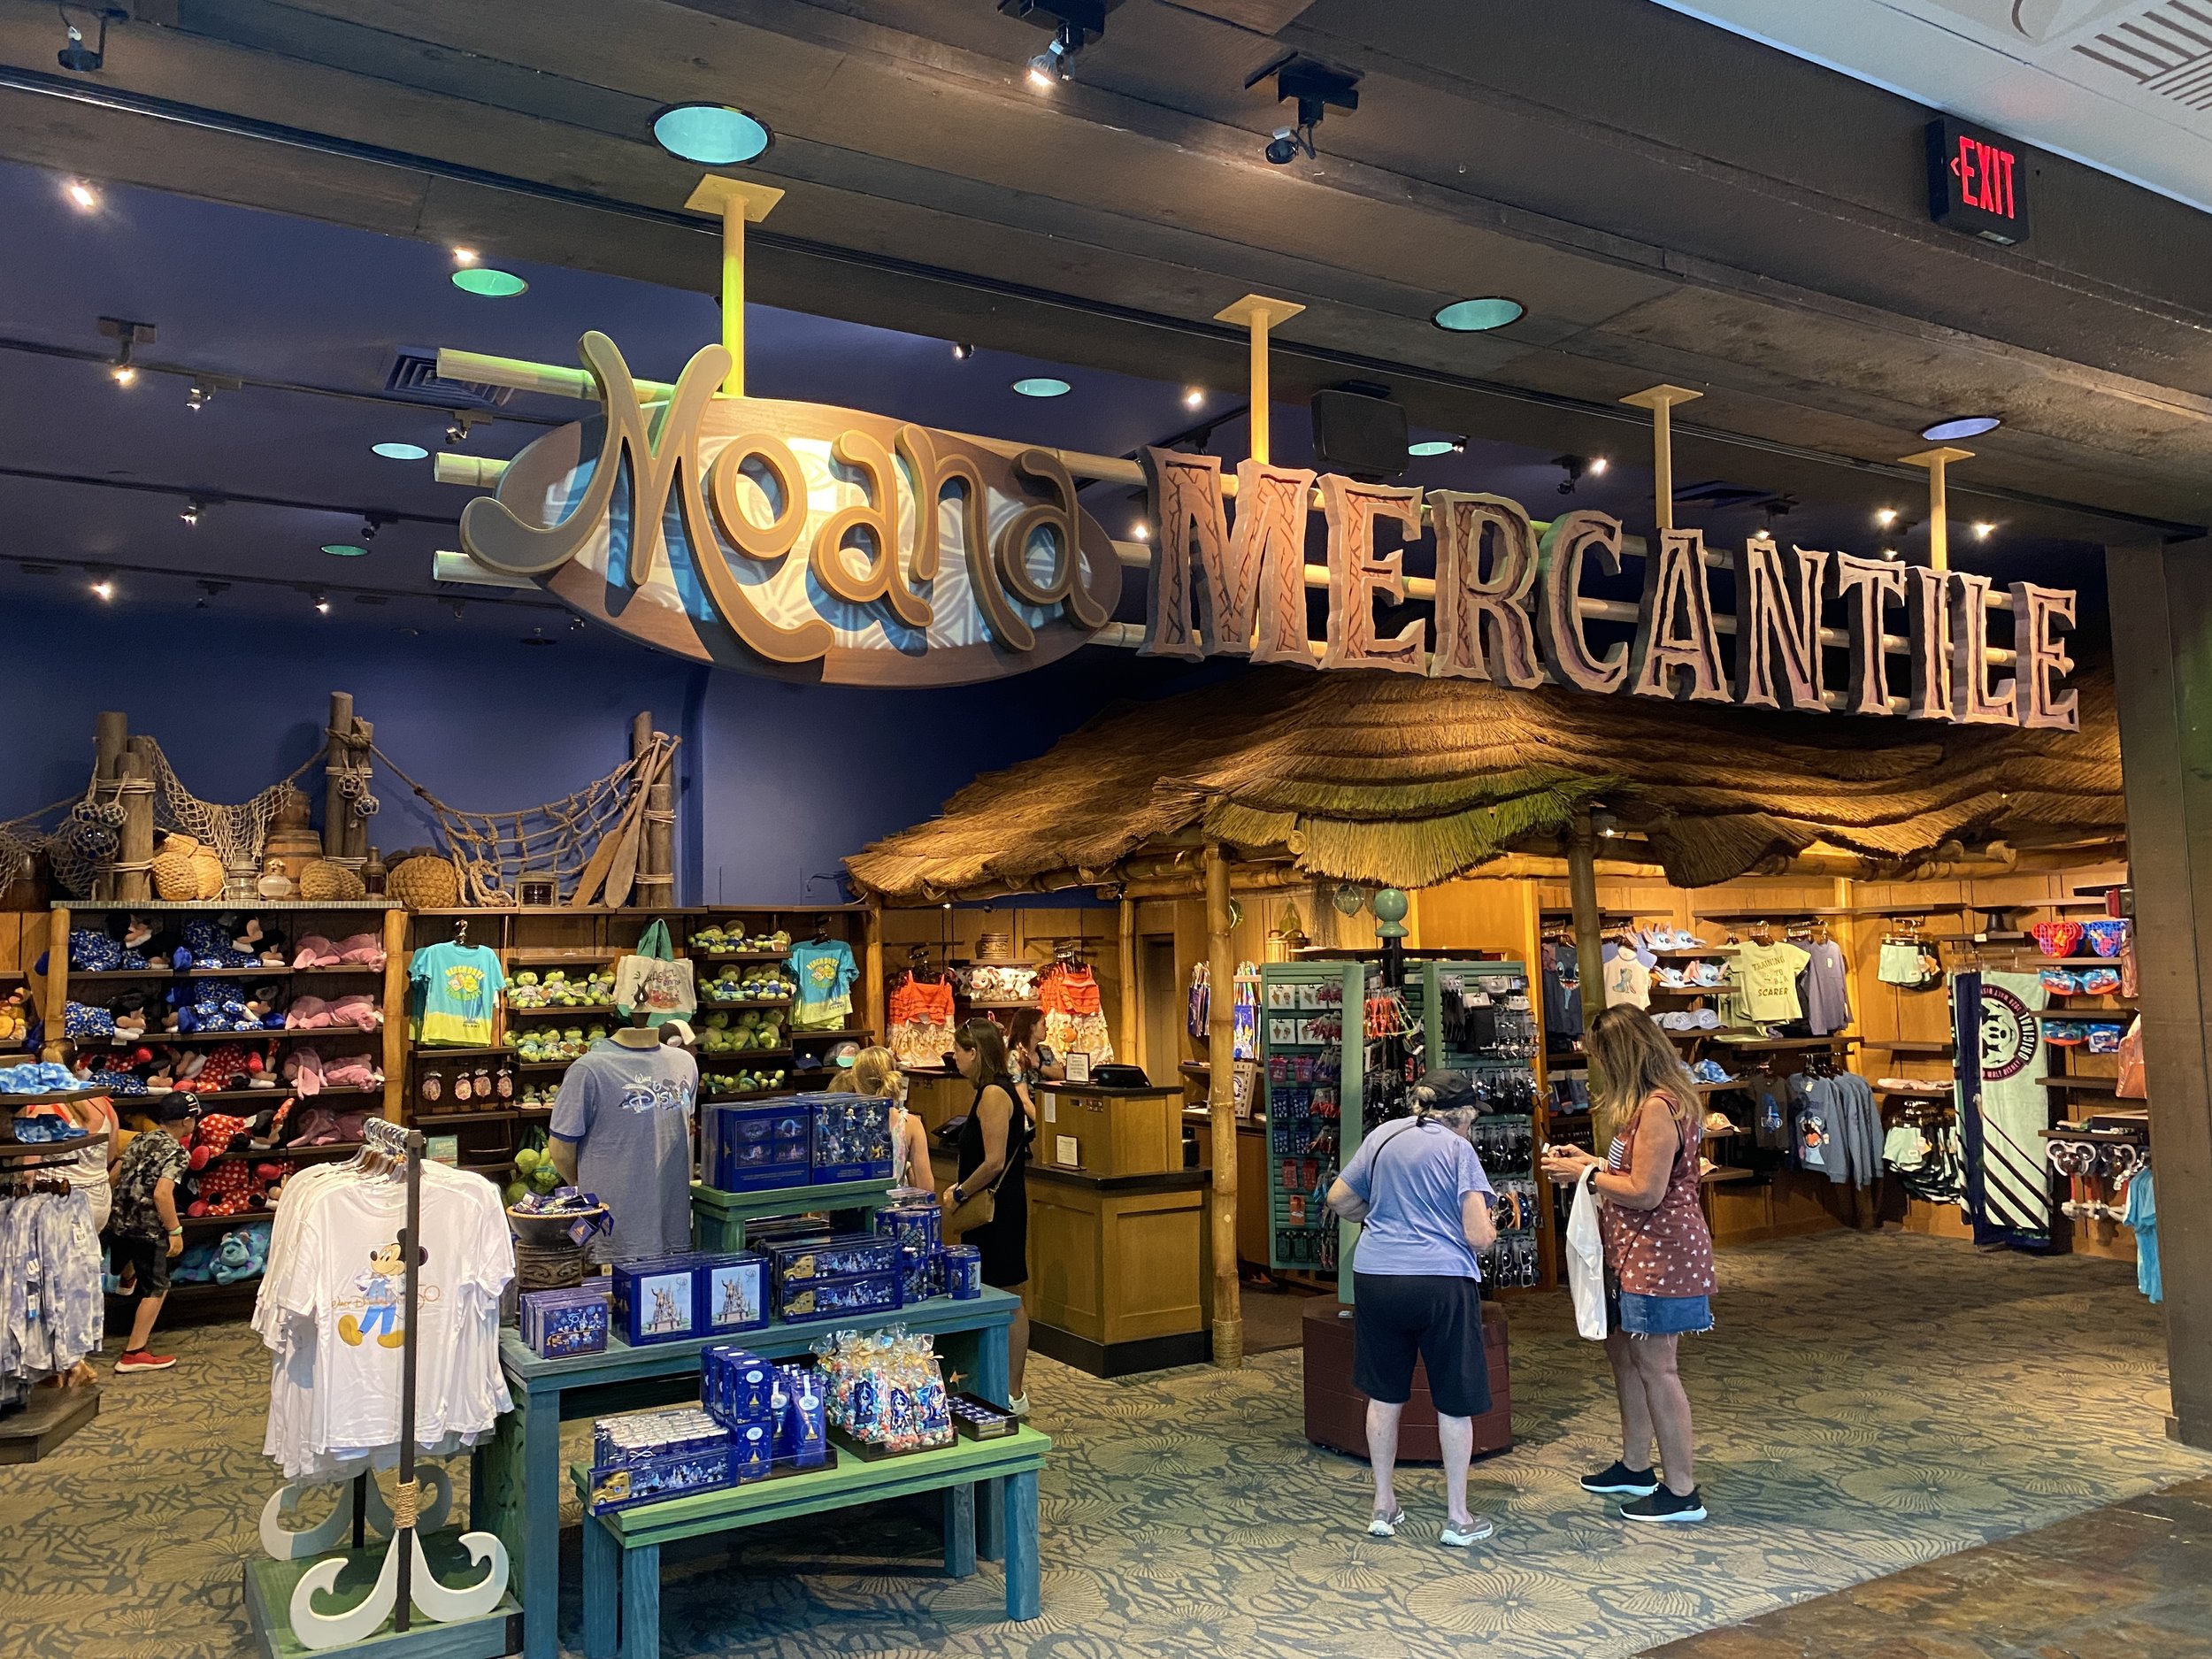  Moana Mercantile: Here you’ll find another selection of Disney merchandise along with sundries and snacks.  